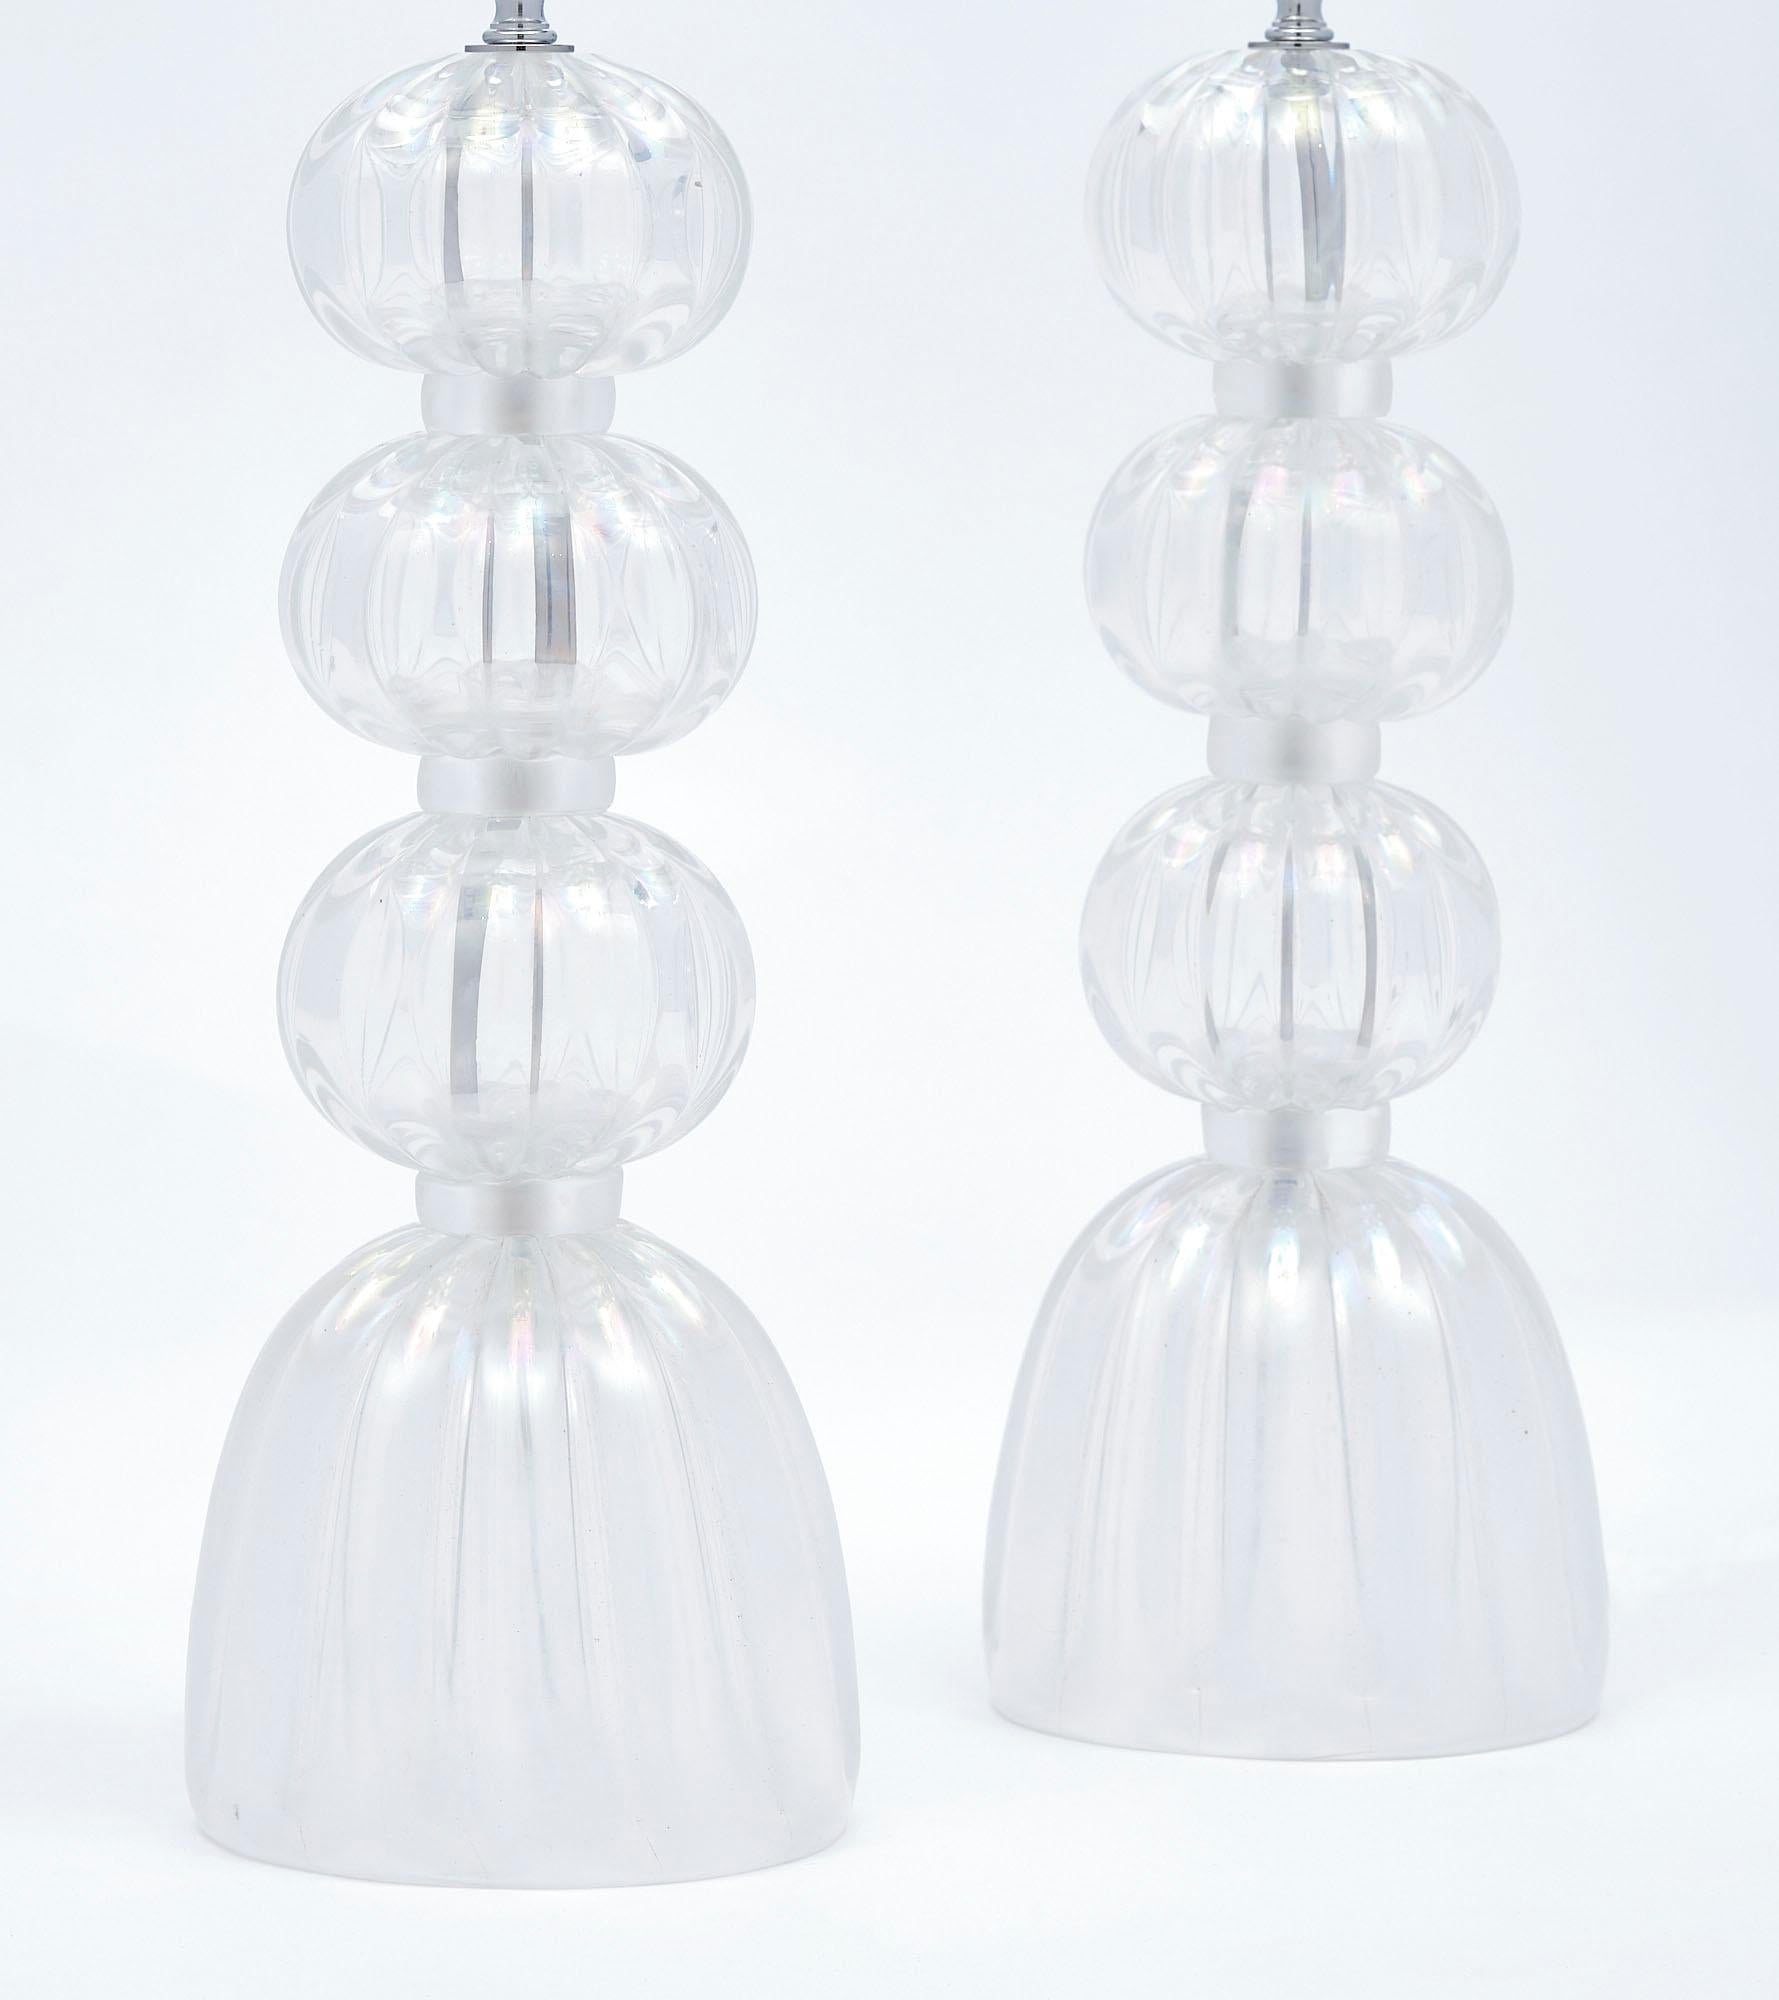 Pair of lamps, Italian, from the island of Murano made of clear glass spheres and base with an iridescent tone. The light reflected from the surface of the glass reflects off as colors of the rainbow. It is obtained by exposing the work in progress